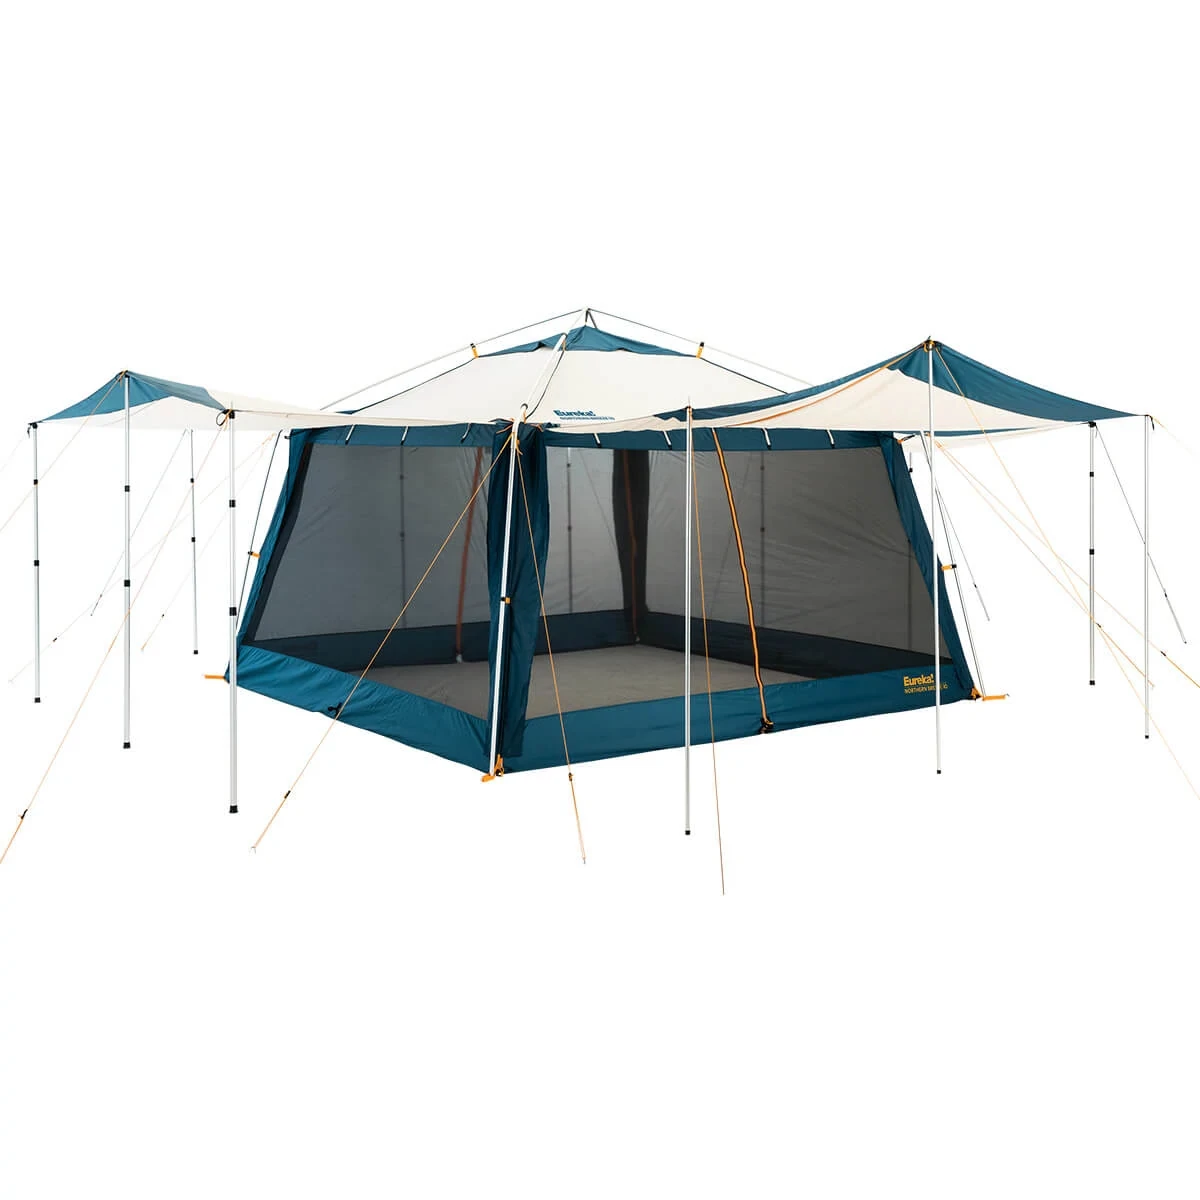 Northern Breeze 10 Screen House with Awning